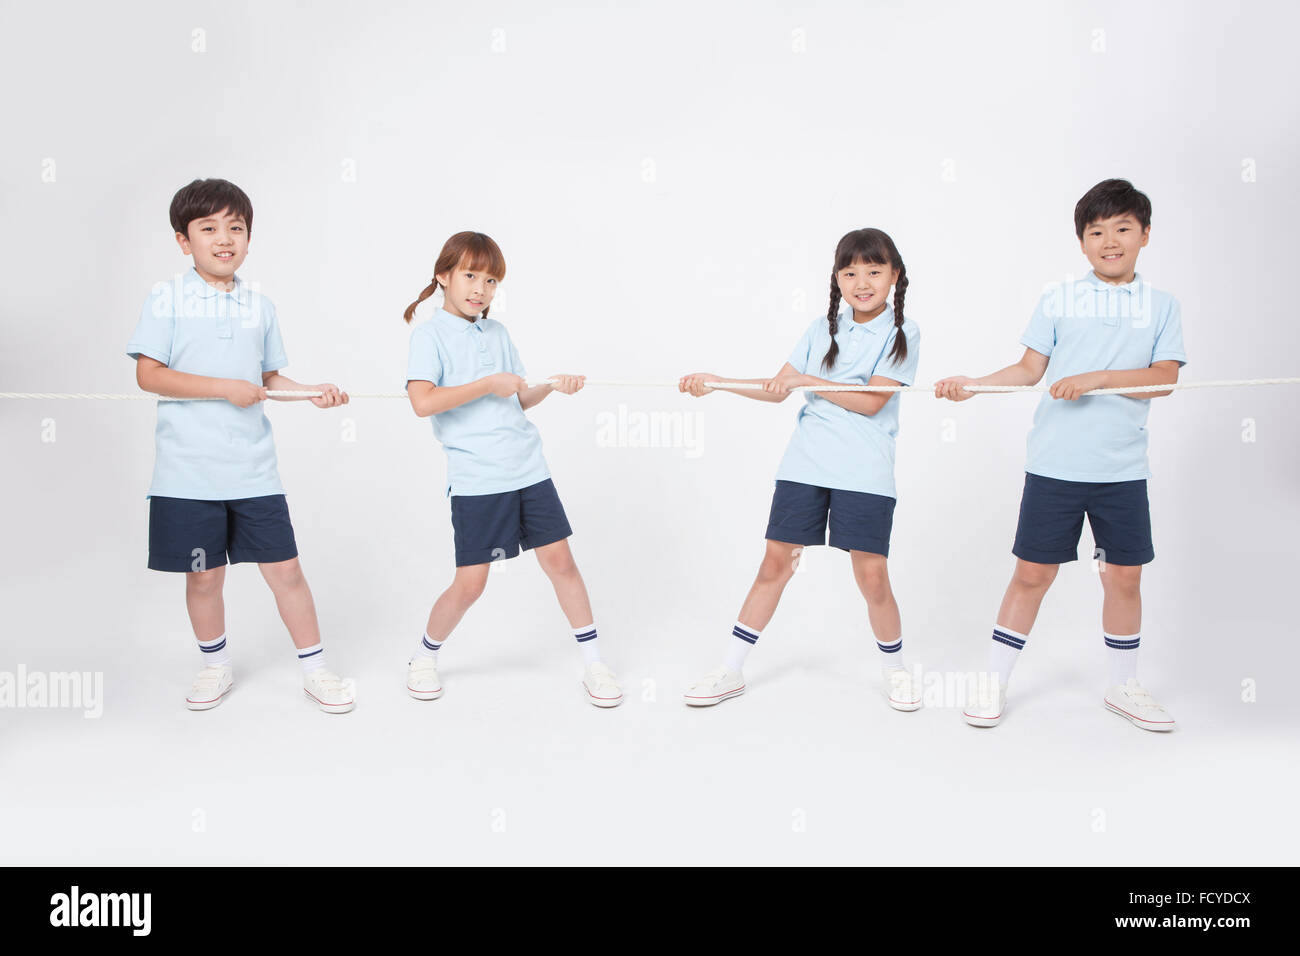 Four elementary school students in sportswear doing tug of war into two teams Stock Photo